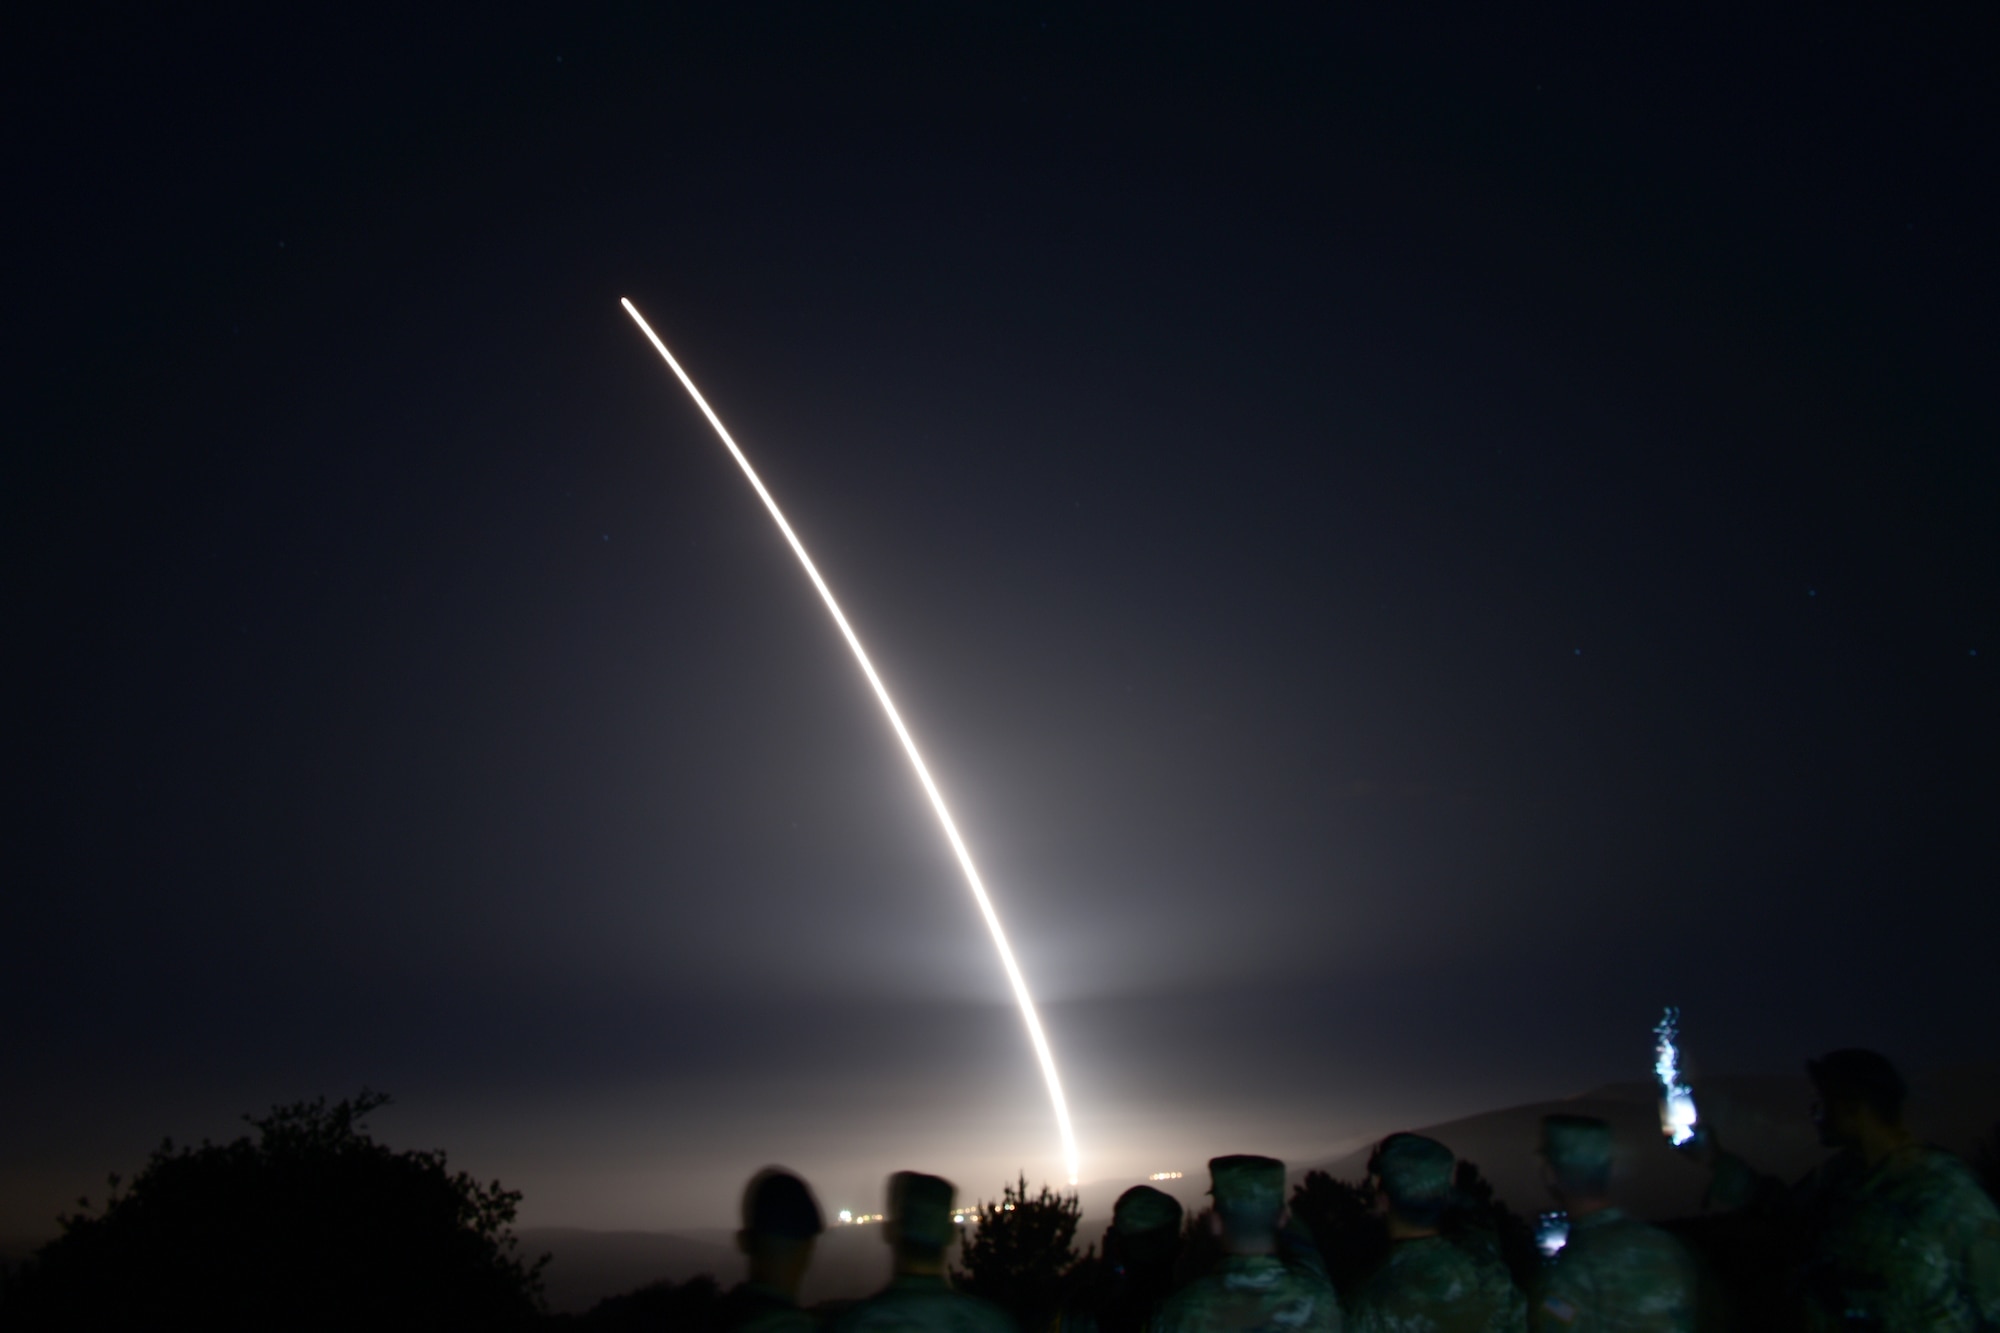 An Air Force Global Strike Command unarmed Minuteman III intercontinental ballistic missile launches during an operational test at 12:53 a.m. Pacific Time (Wednesday, August, 11, 2021), at Vandenberg Space Force Base, Calif. ICBM test launches demonstrate that the U.S. ICBM fleet is relevant, essential and key to leveraging dominance in an era of Strategic Competition. (U.S. Air Force photo by Airman First Class Tiarra Sibley)